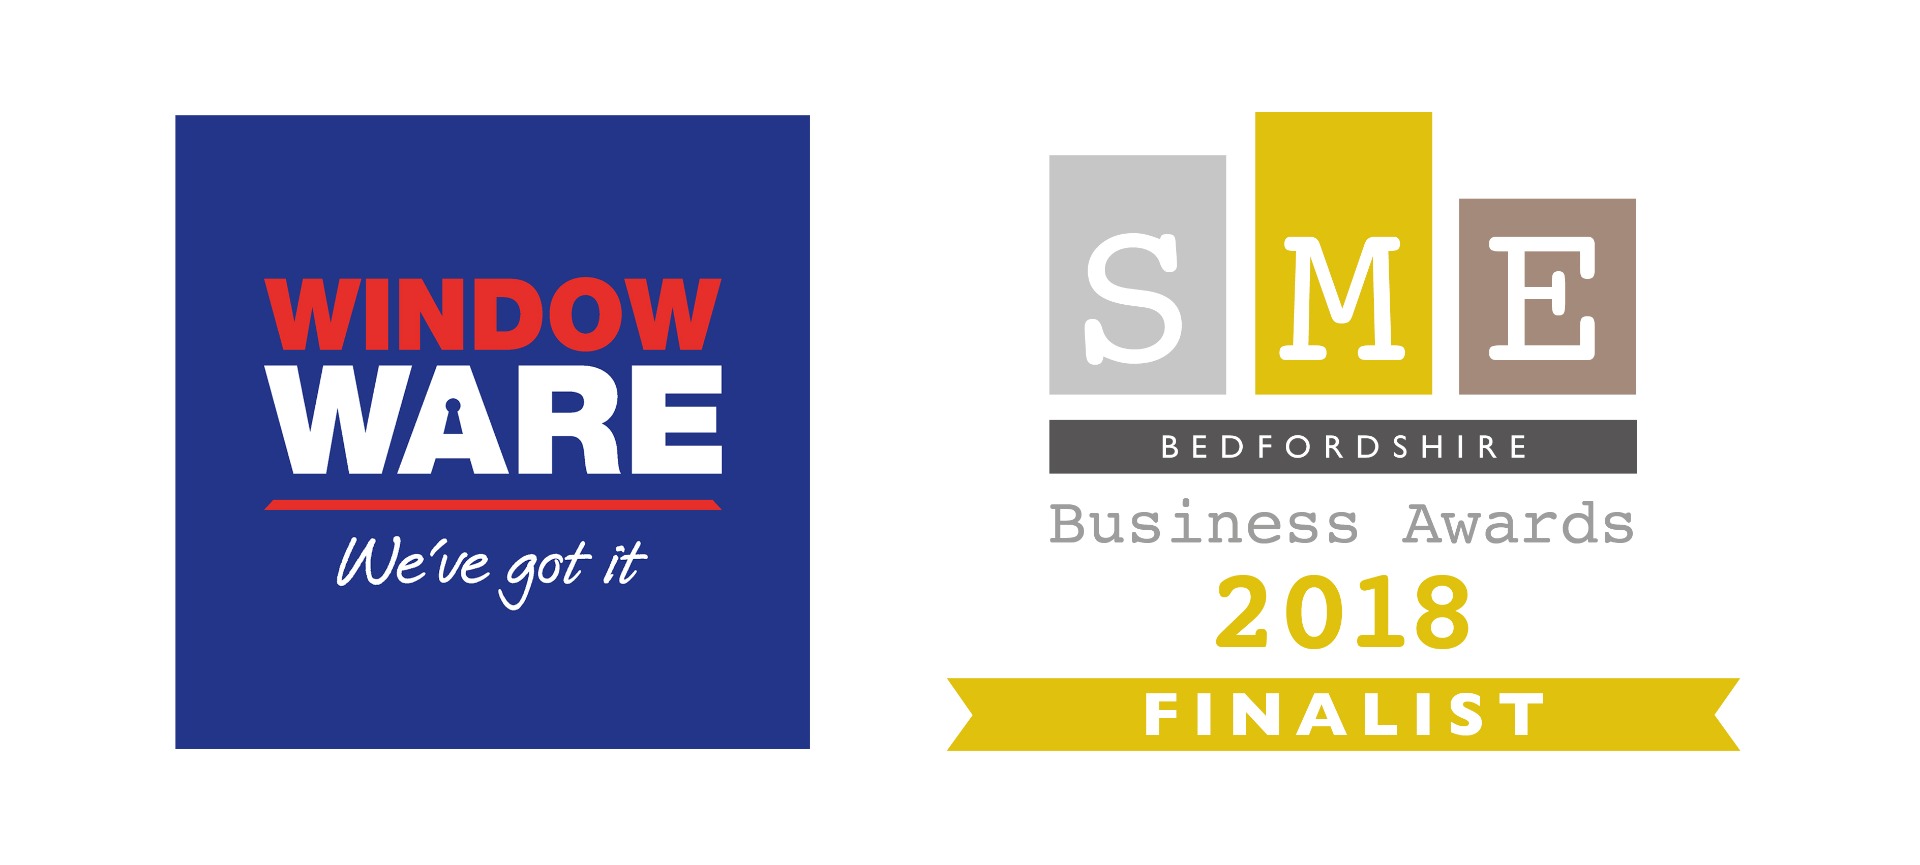 We’re a finalist in the SME Bedfordshire Business Awards 2018 – Service Excellence category